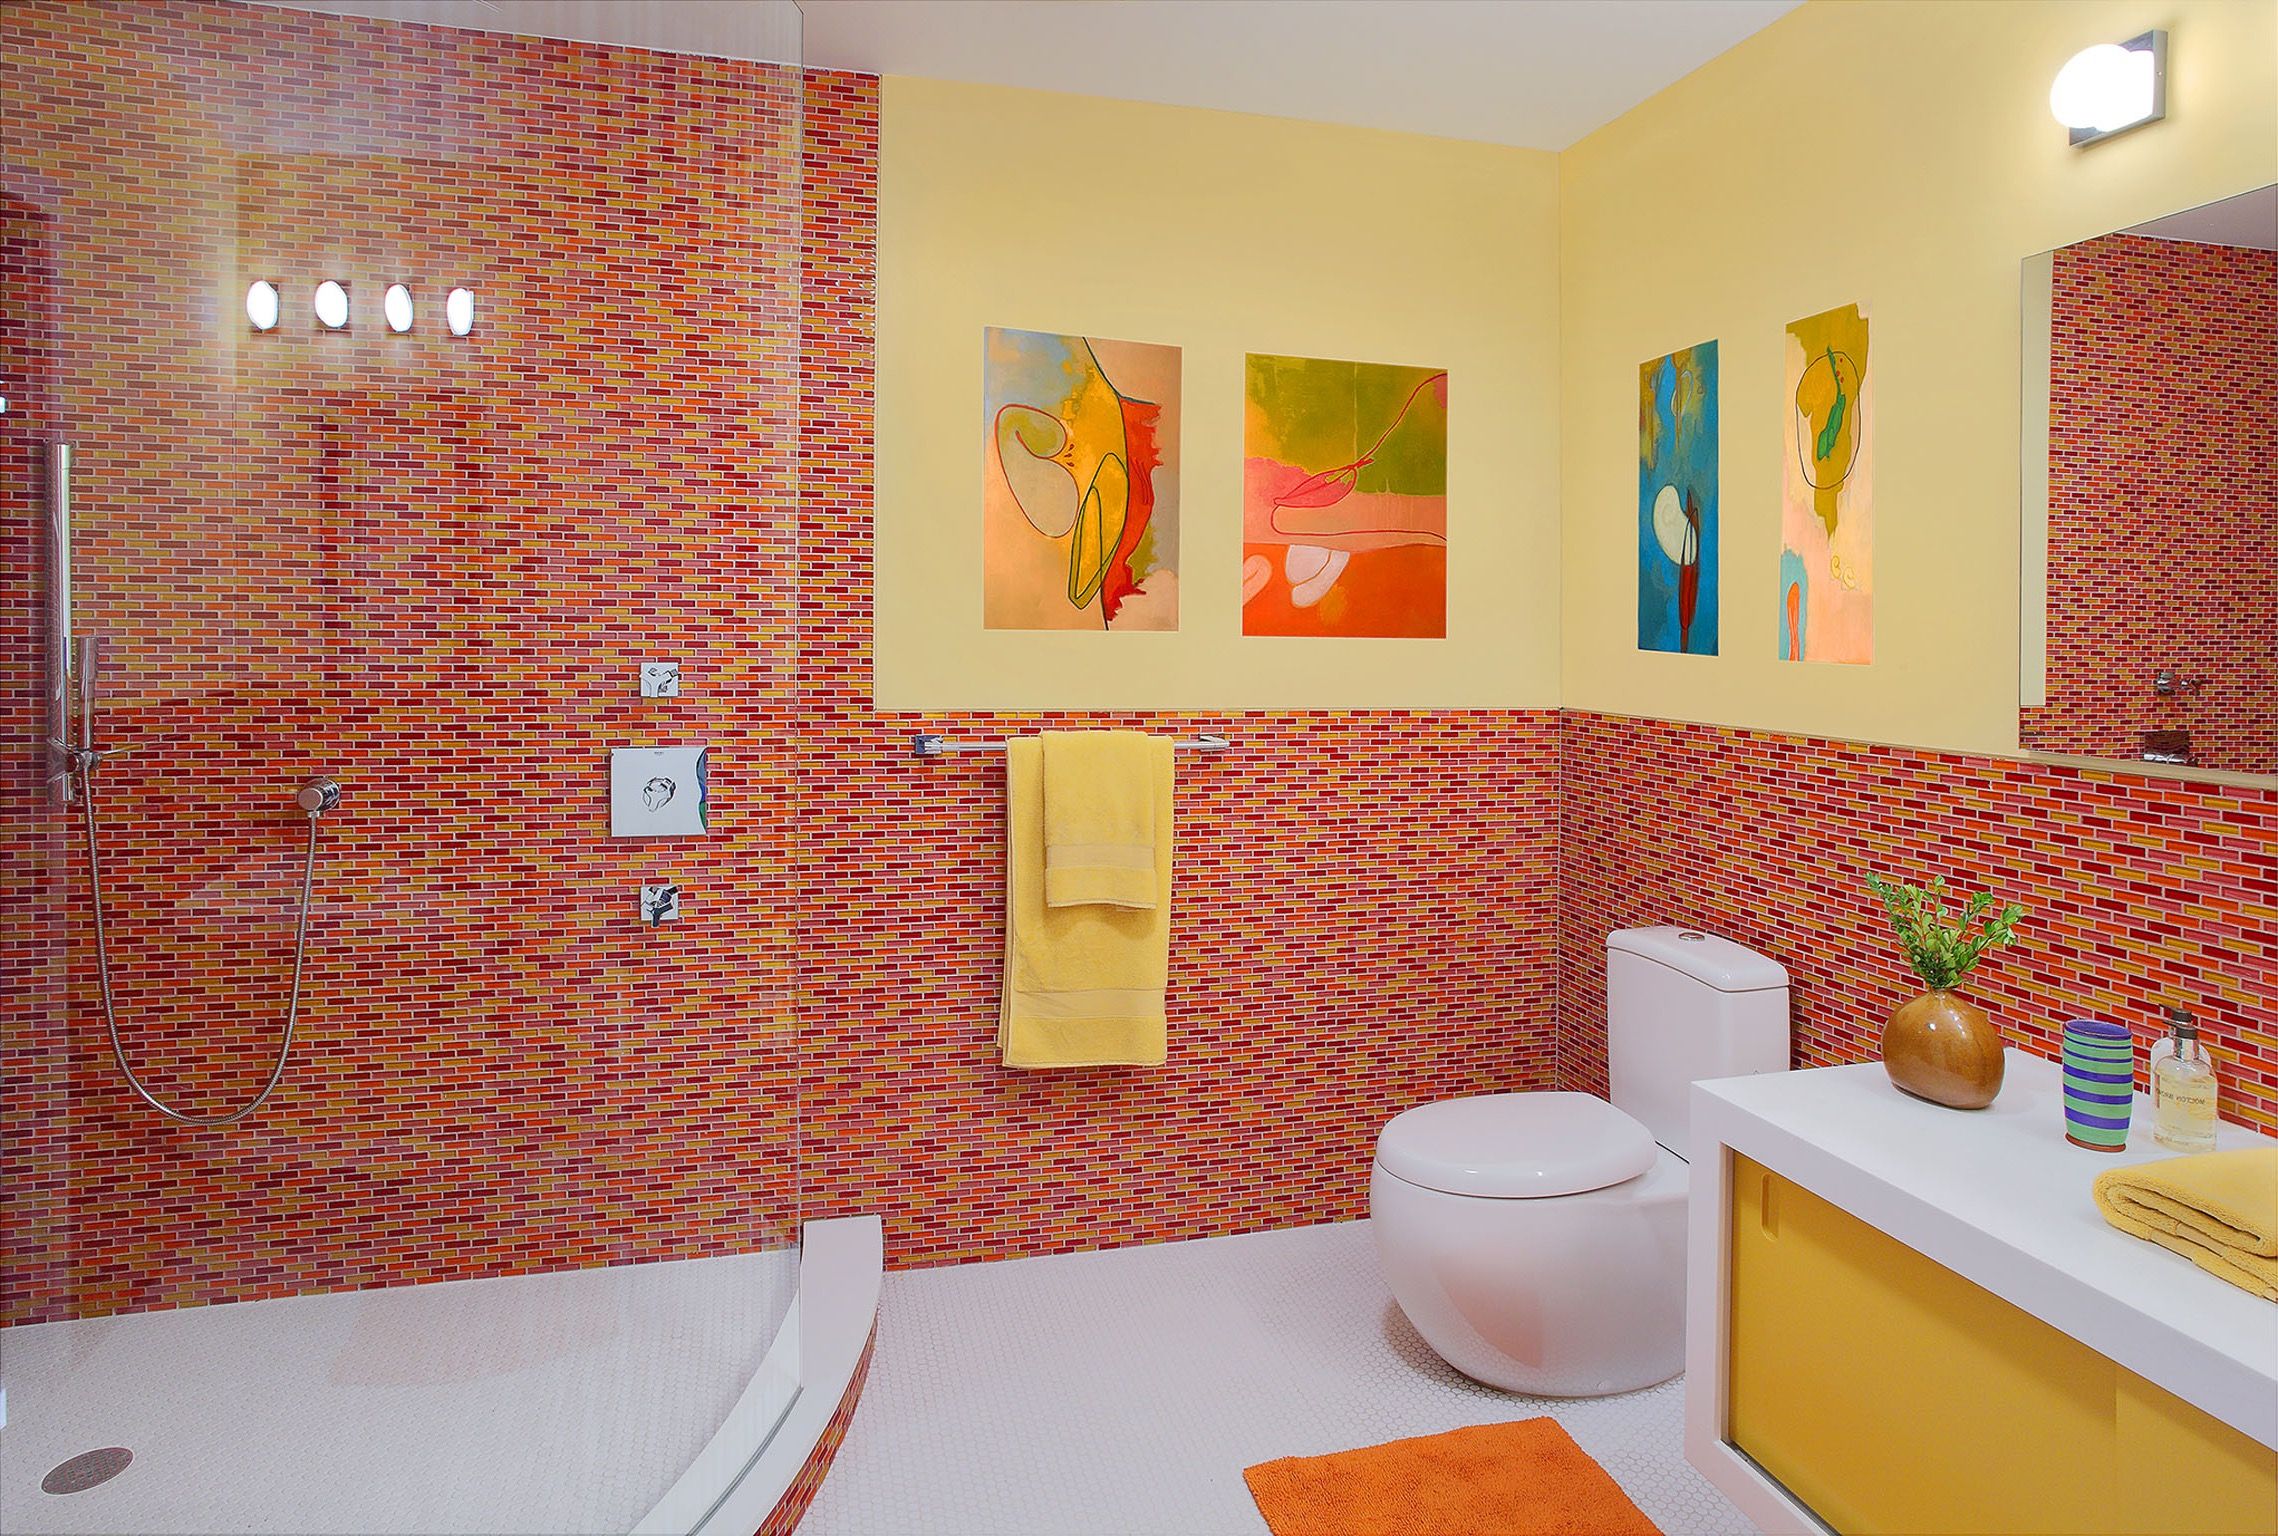 Cozy And Cute Bathroom Wall Decor With Colorful Ceramic Tiles (View 3 of 18)